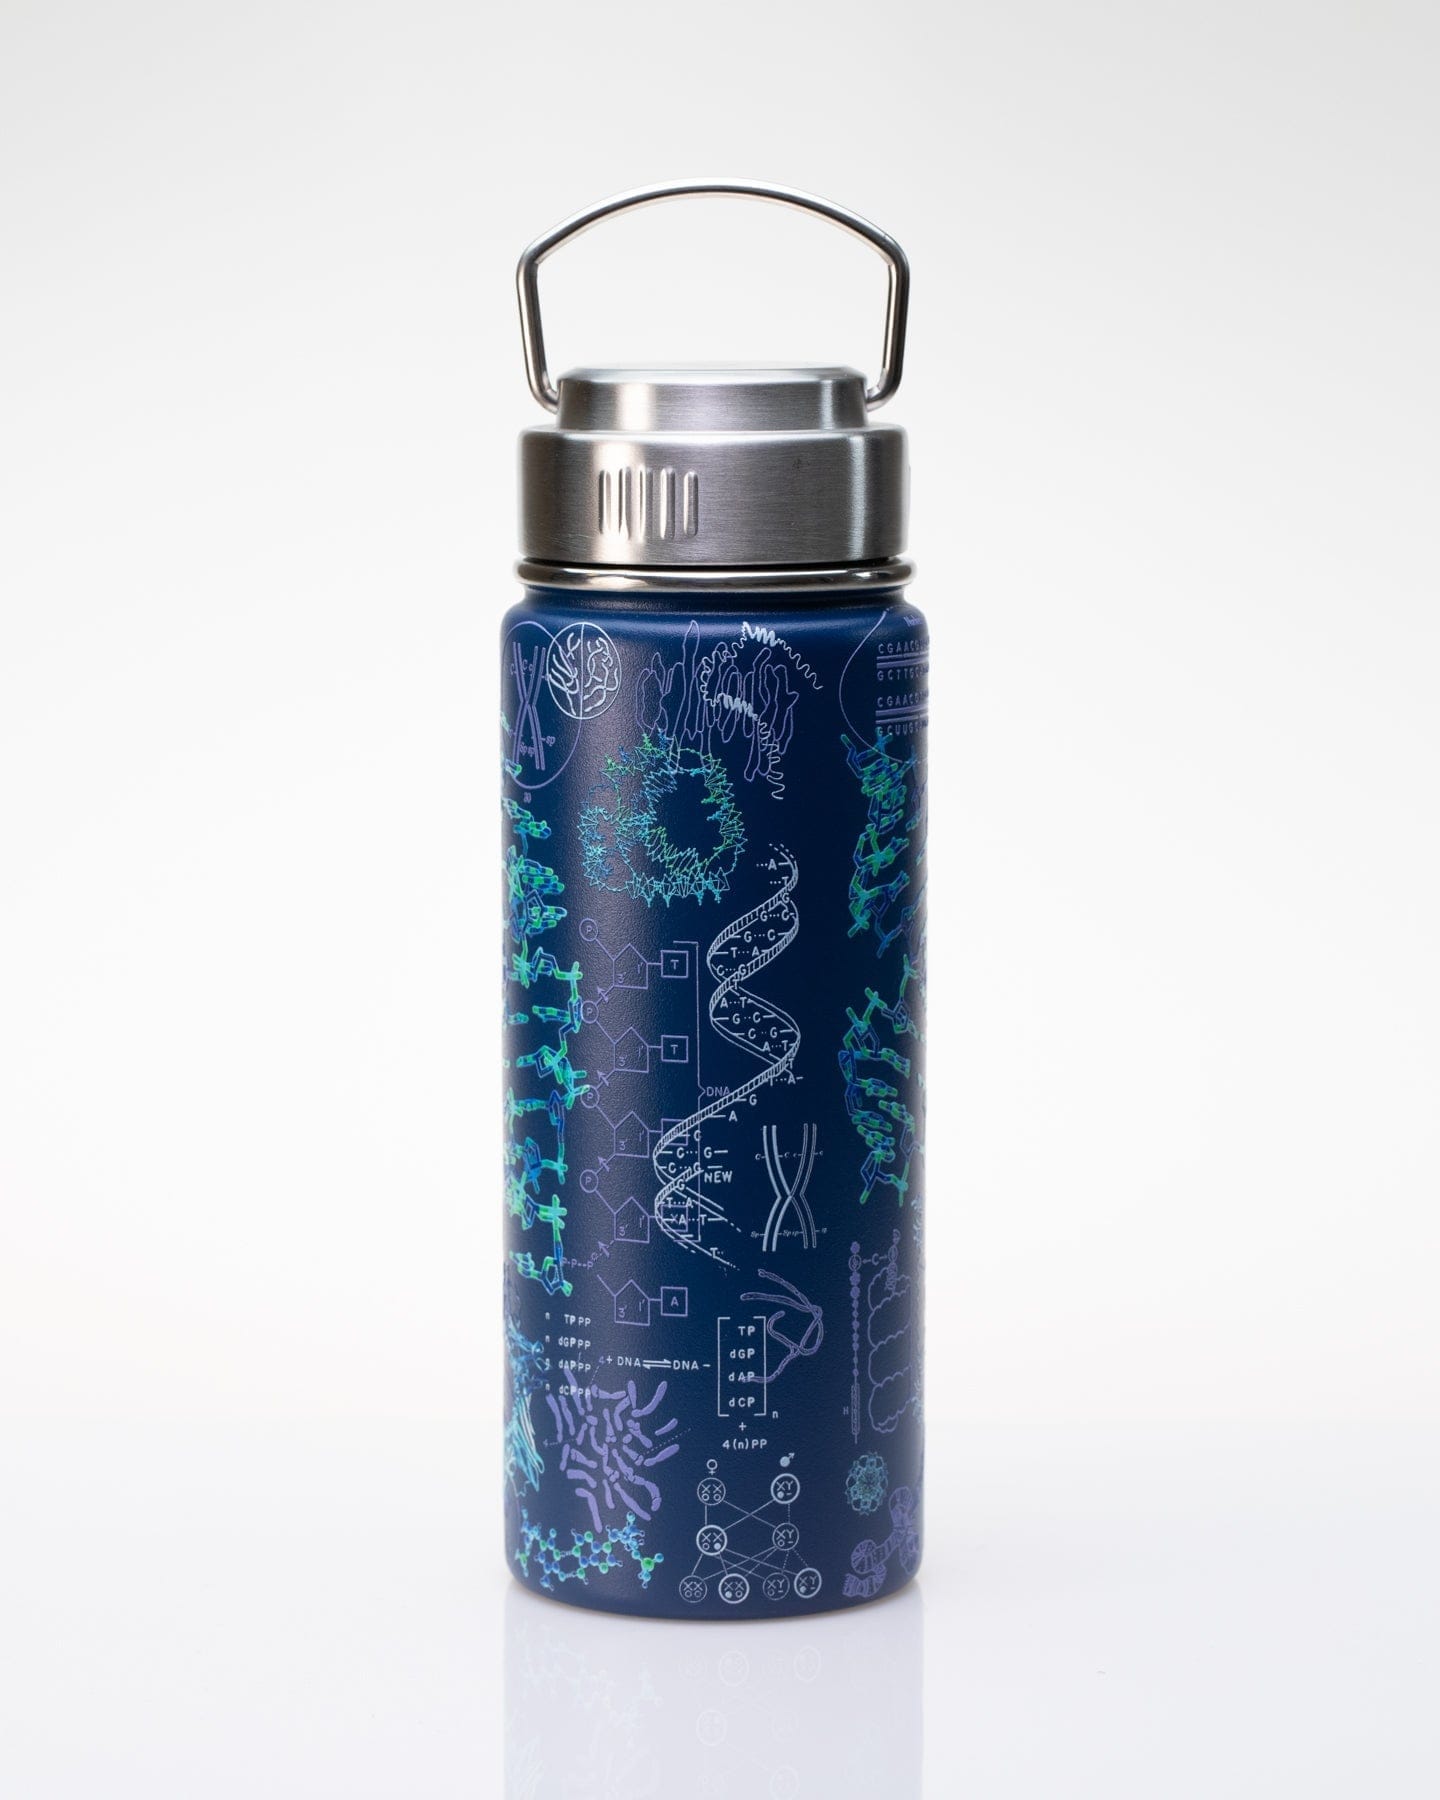 Glass Water Bottles With Stainless Steel Lids And Stickers And Cup